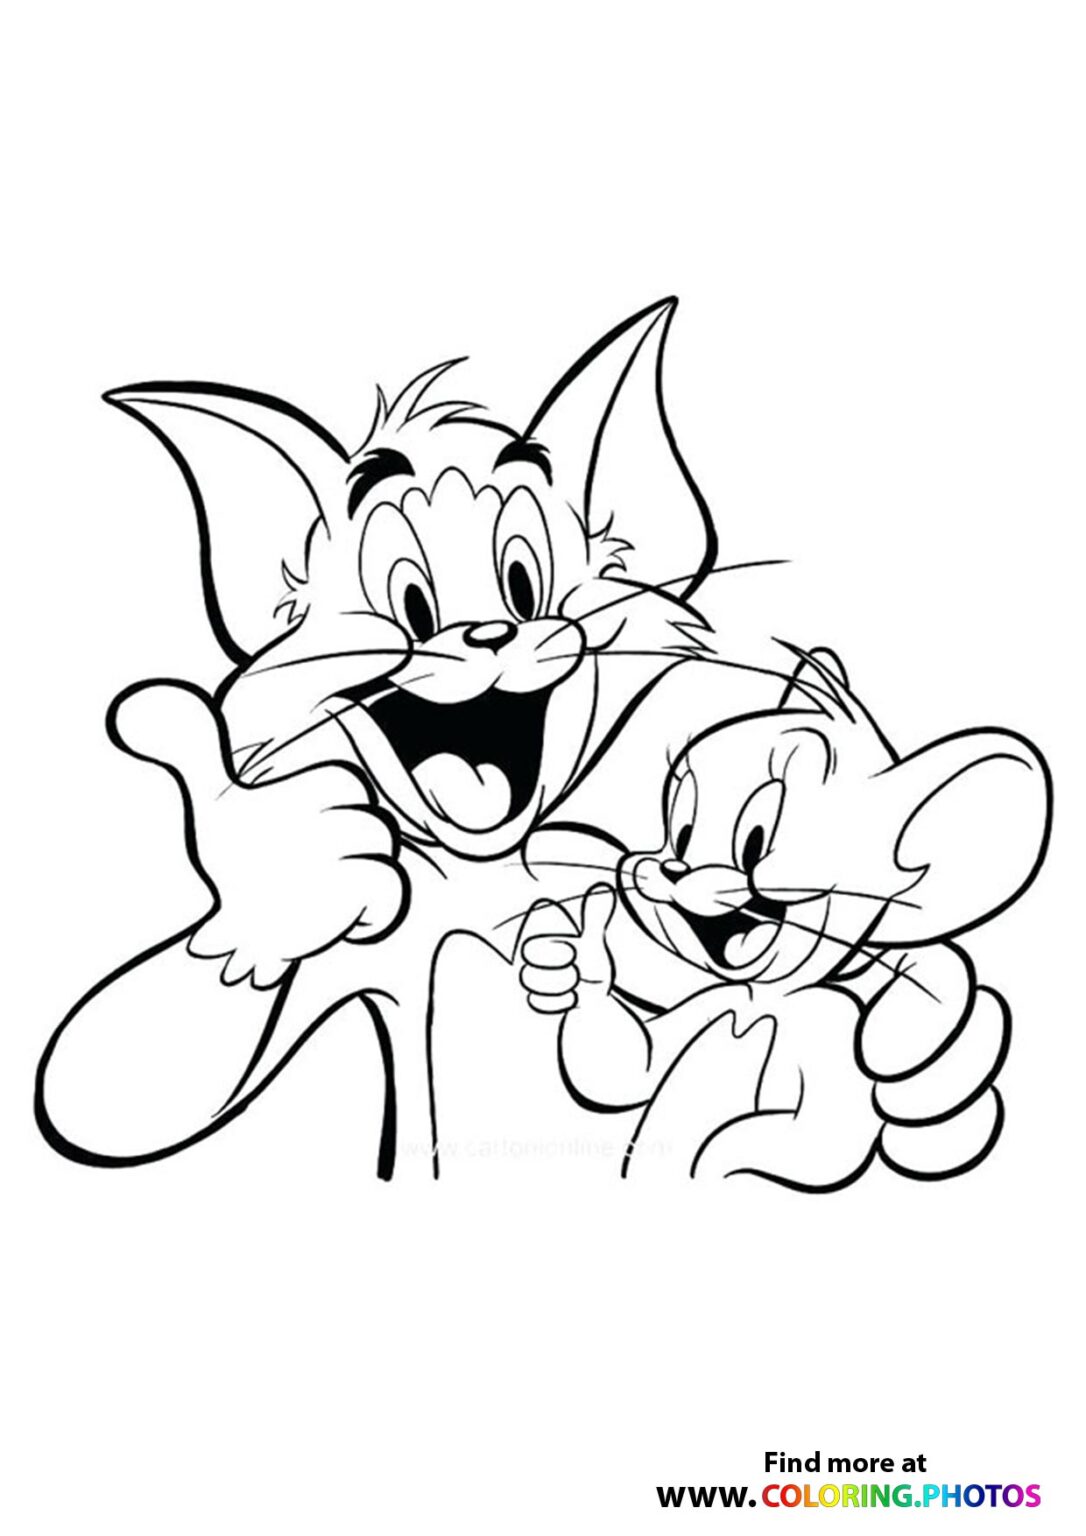 Cartoons - Coloring Pages For Kids | Free And Easy Print Or Download